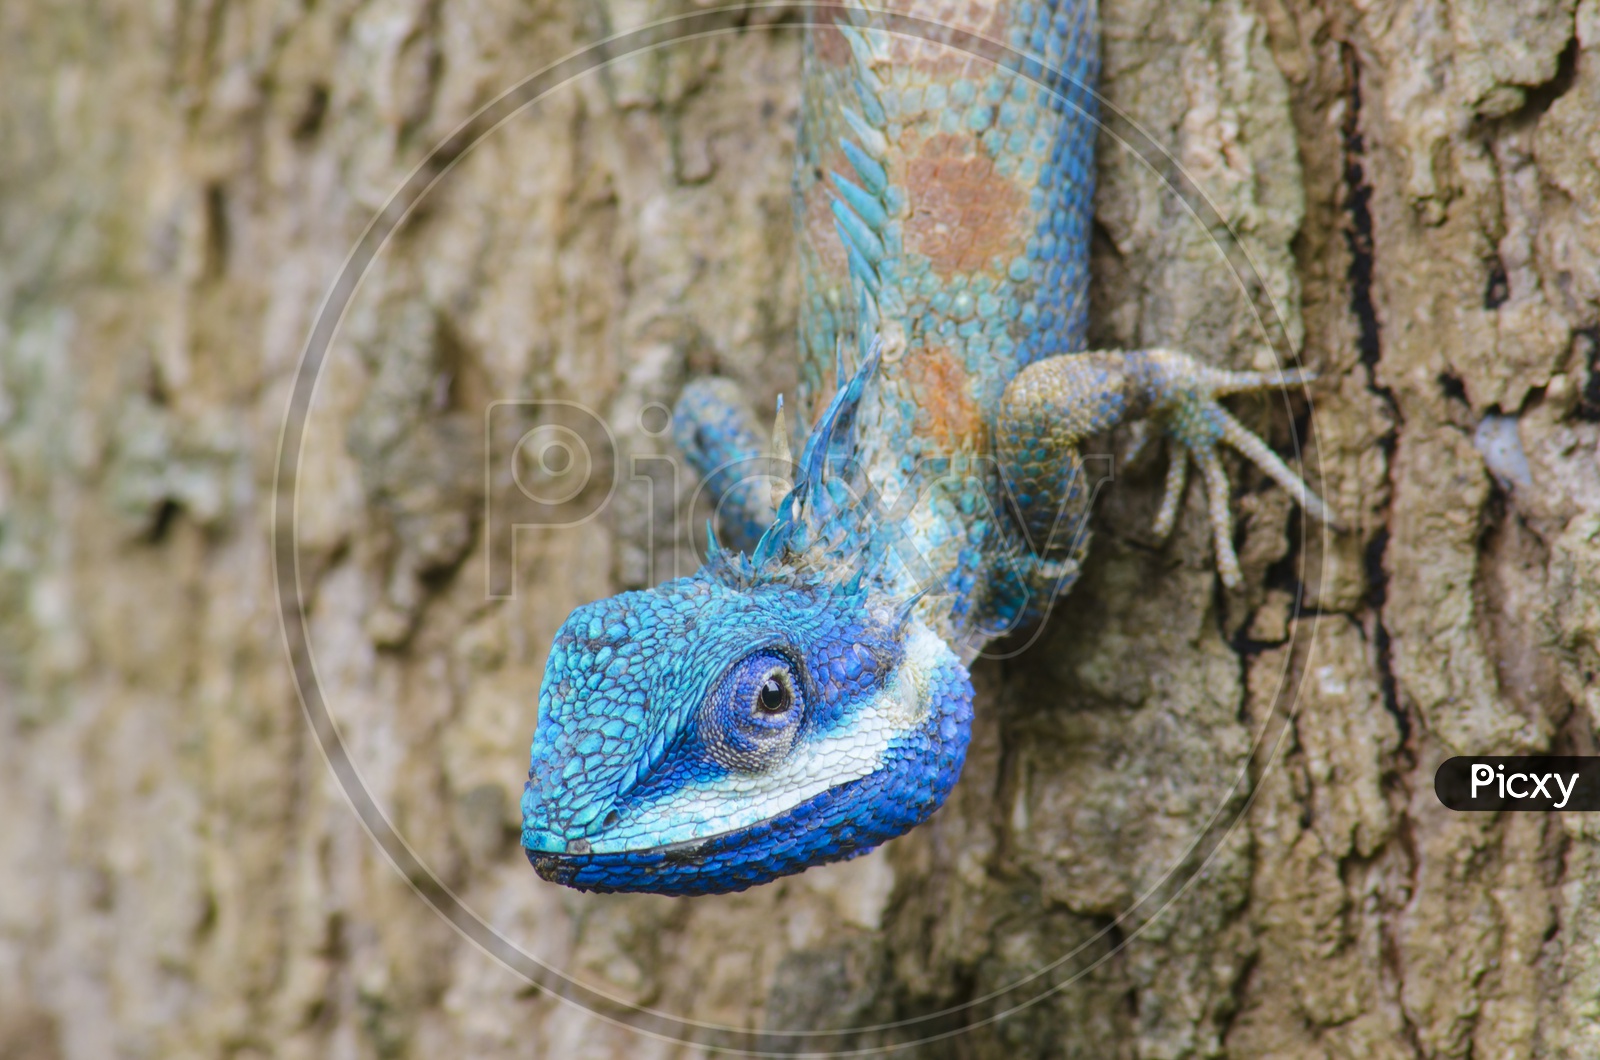 Blue Lizard with big eyes in the Thai Forest